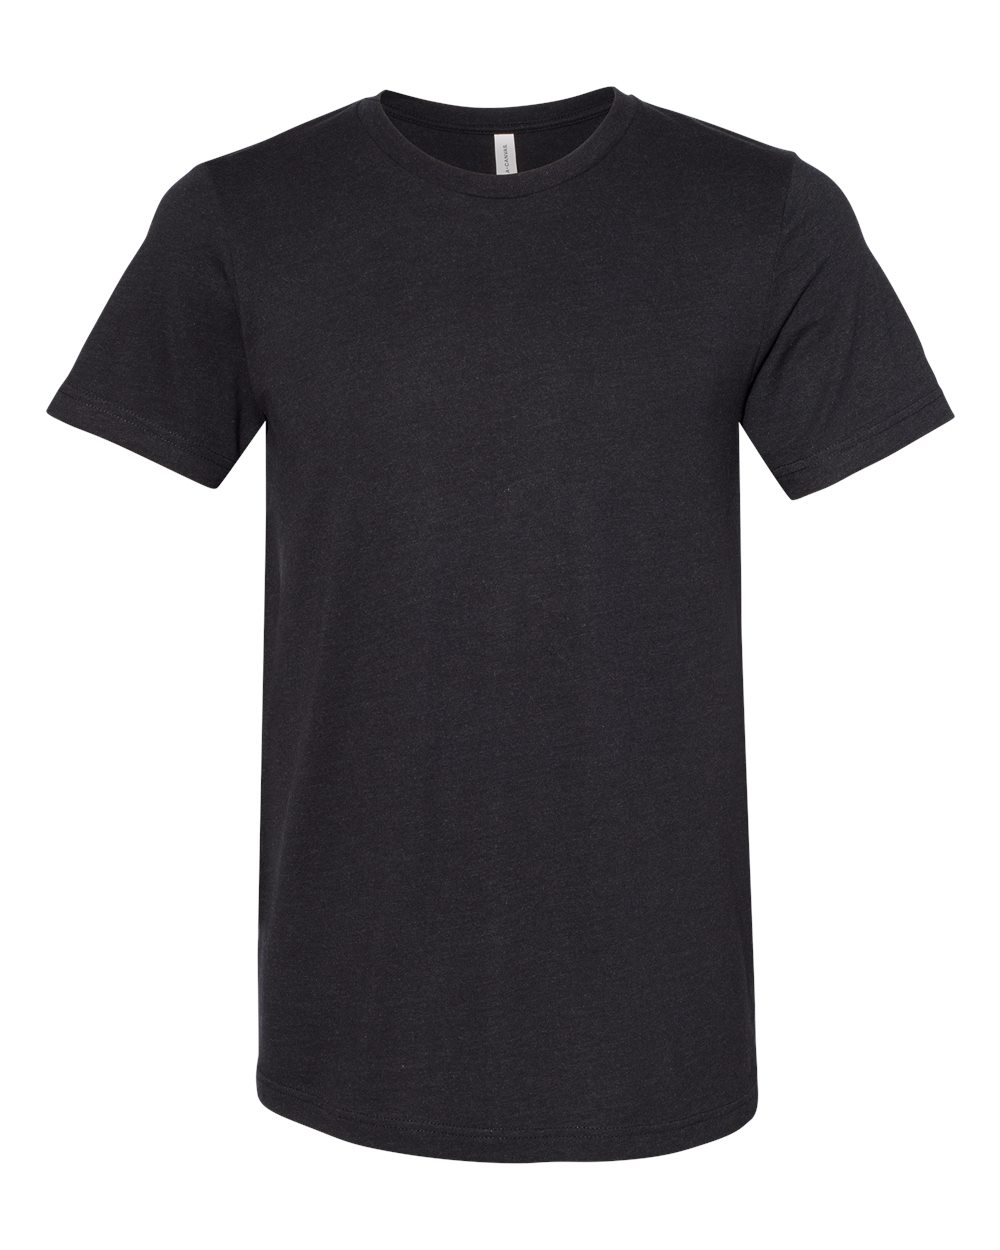 BELLA + CANVAS - Sueded Tee 4.2 oz 52/48 cotton/polyester  Sueded, crafted  from soft cotto0n and featuring a luxe fabric that offers a velvet-touch  sensation, ensuring you experience the epitome of